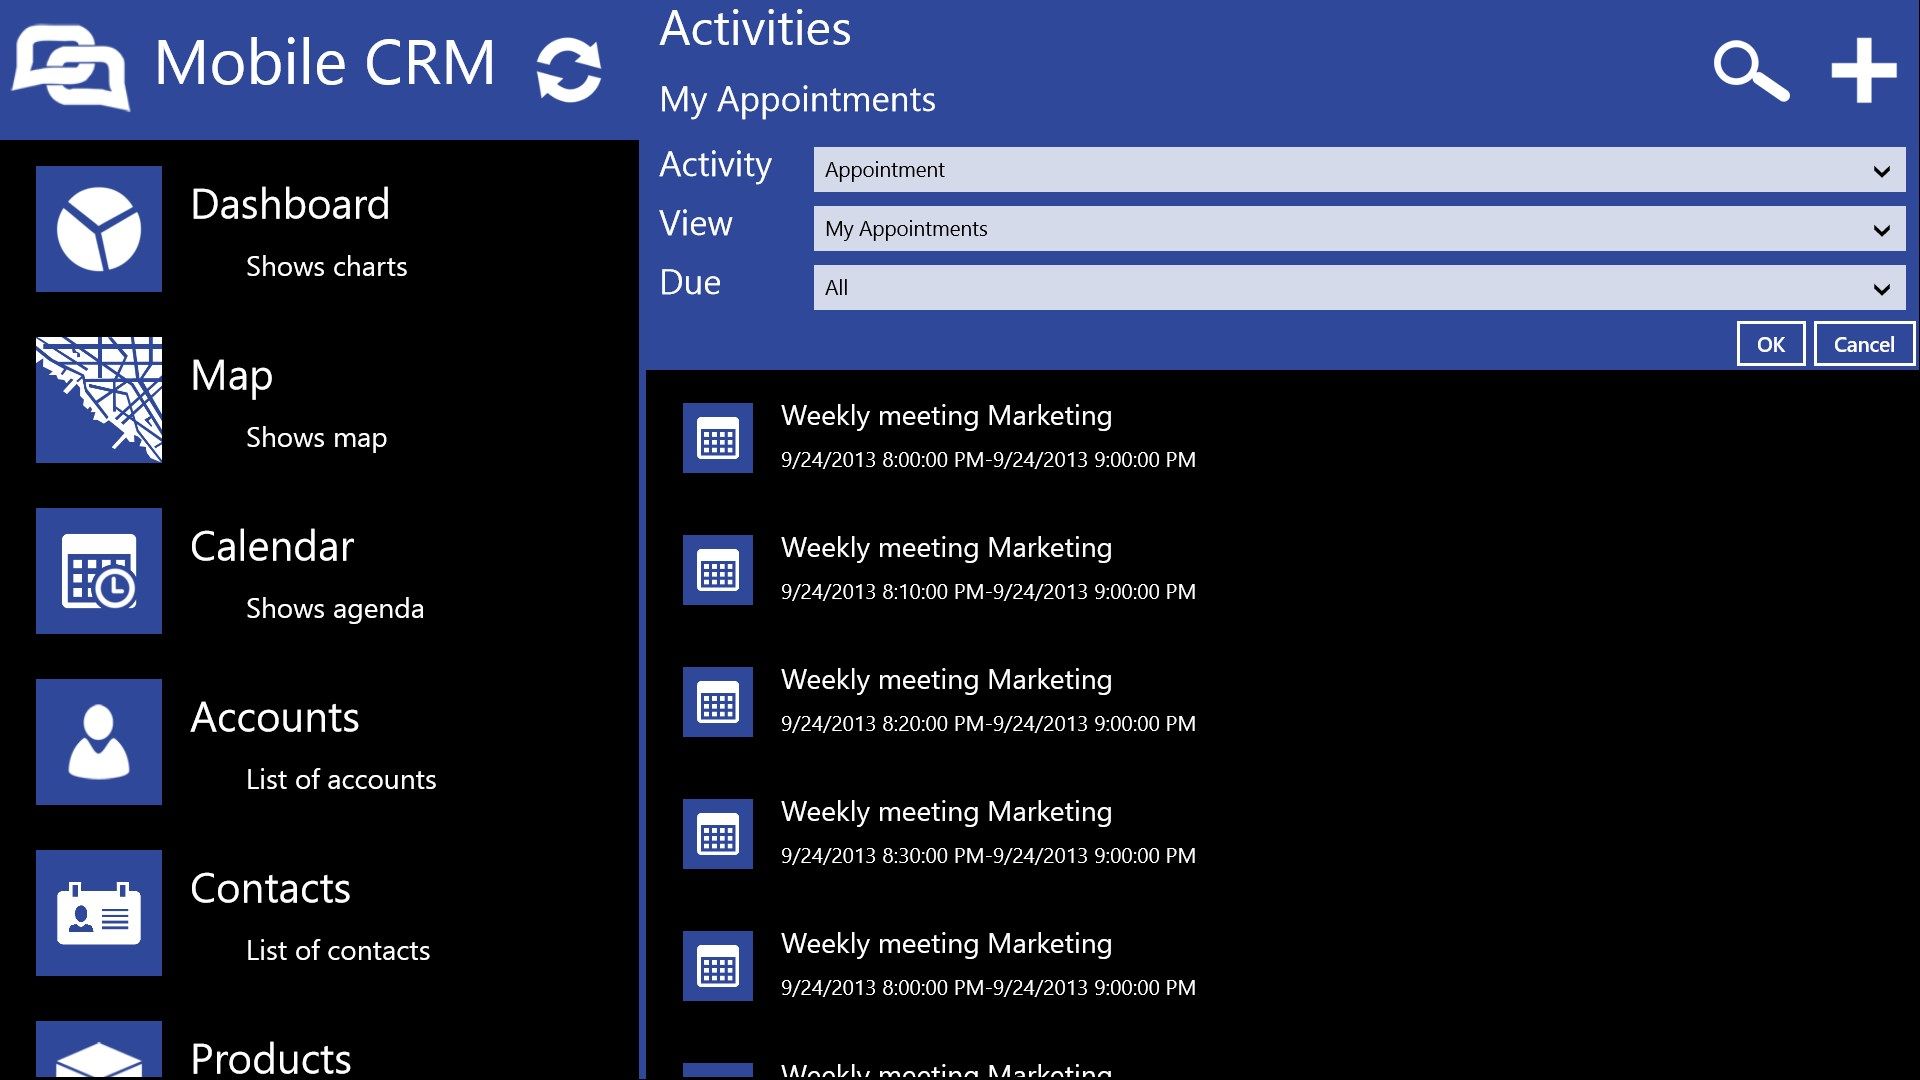 Activities view and expanded filter